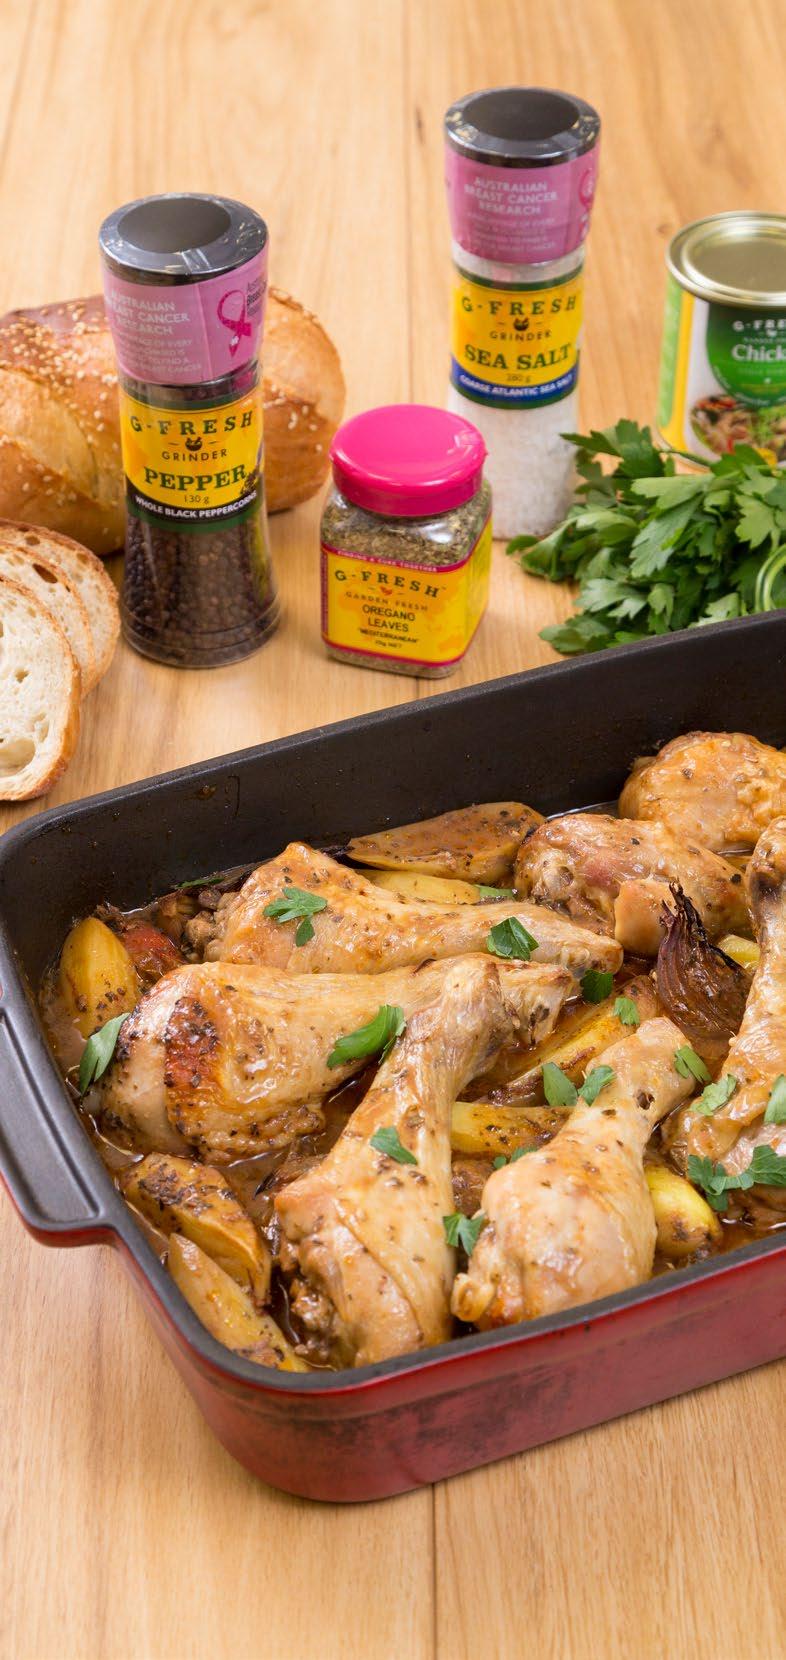 Oregano Chicken and Tomato Tray Bake Author: Bree May, Food According to Bree 8 large chicken drumsticks 1 large red onion 500gms kipfler potatoes or other waxy variety 200gm punnet of cherry